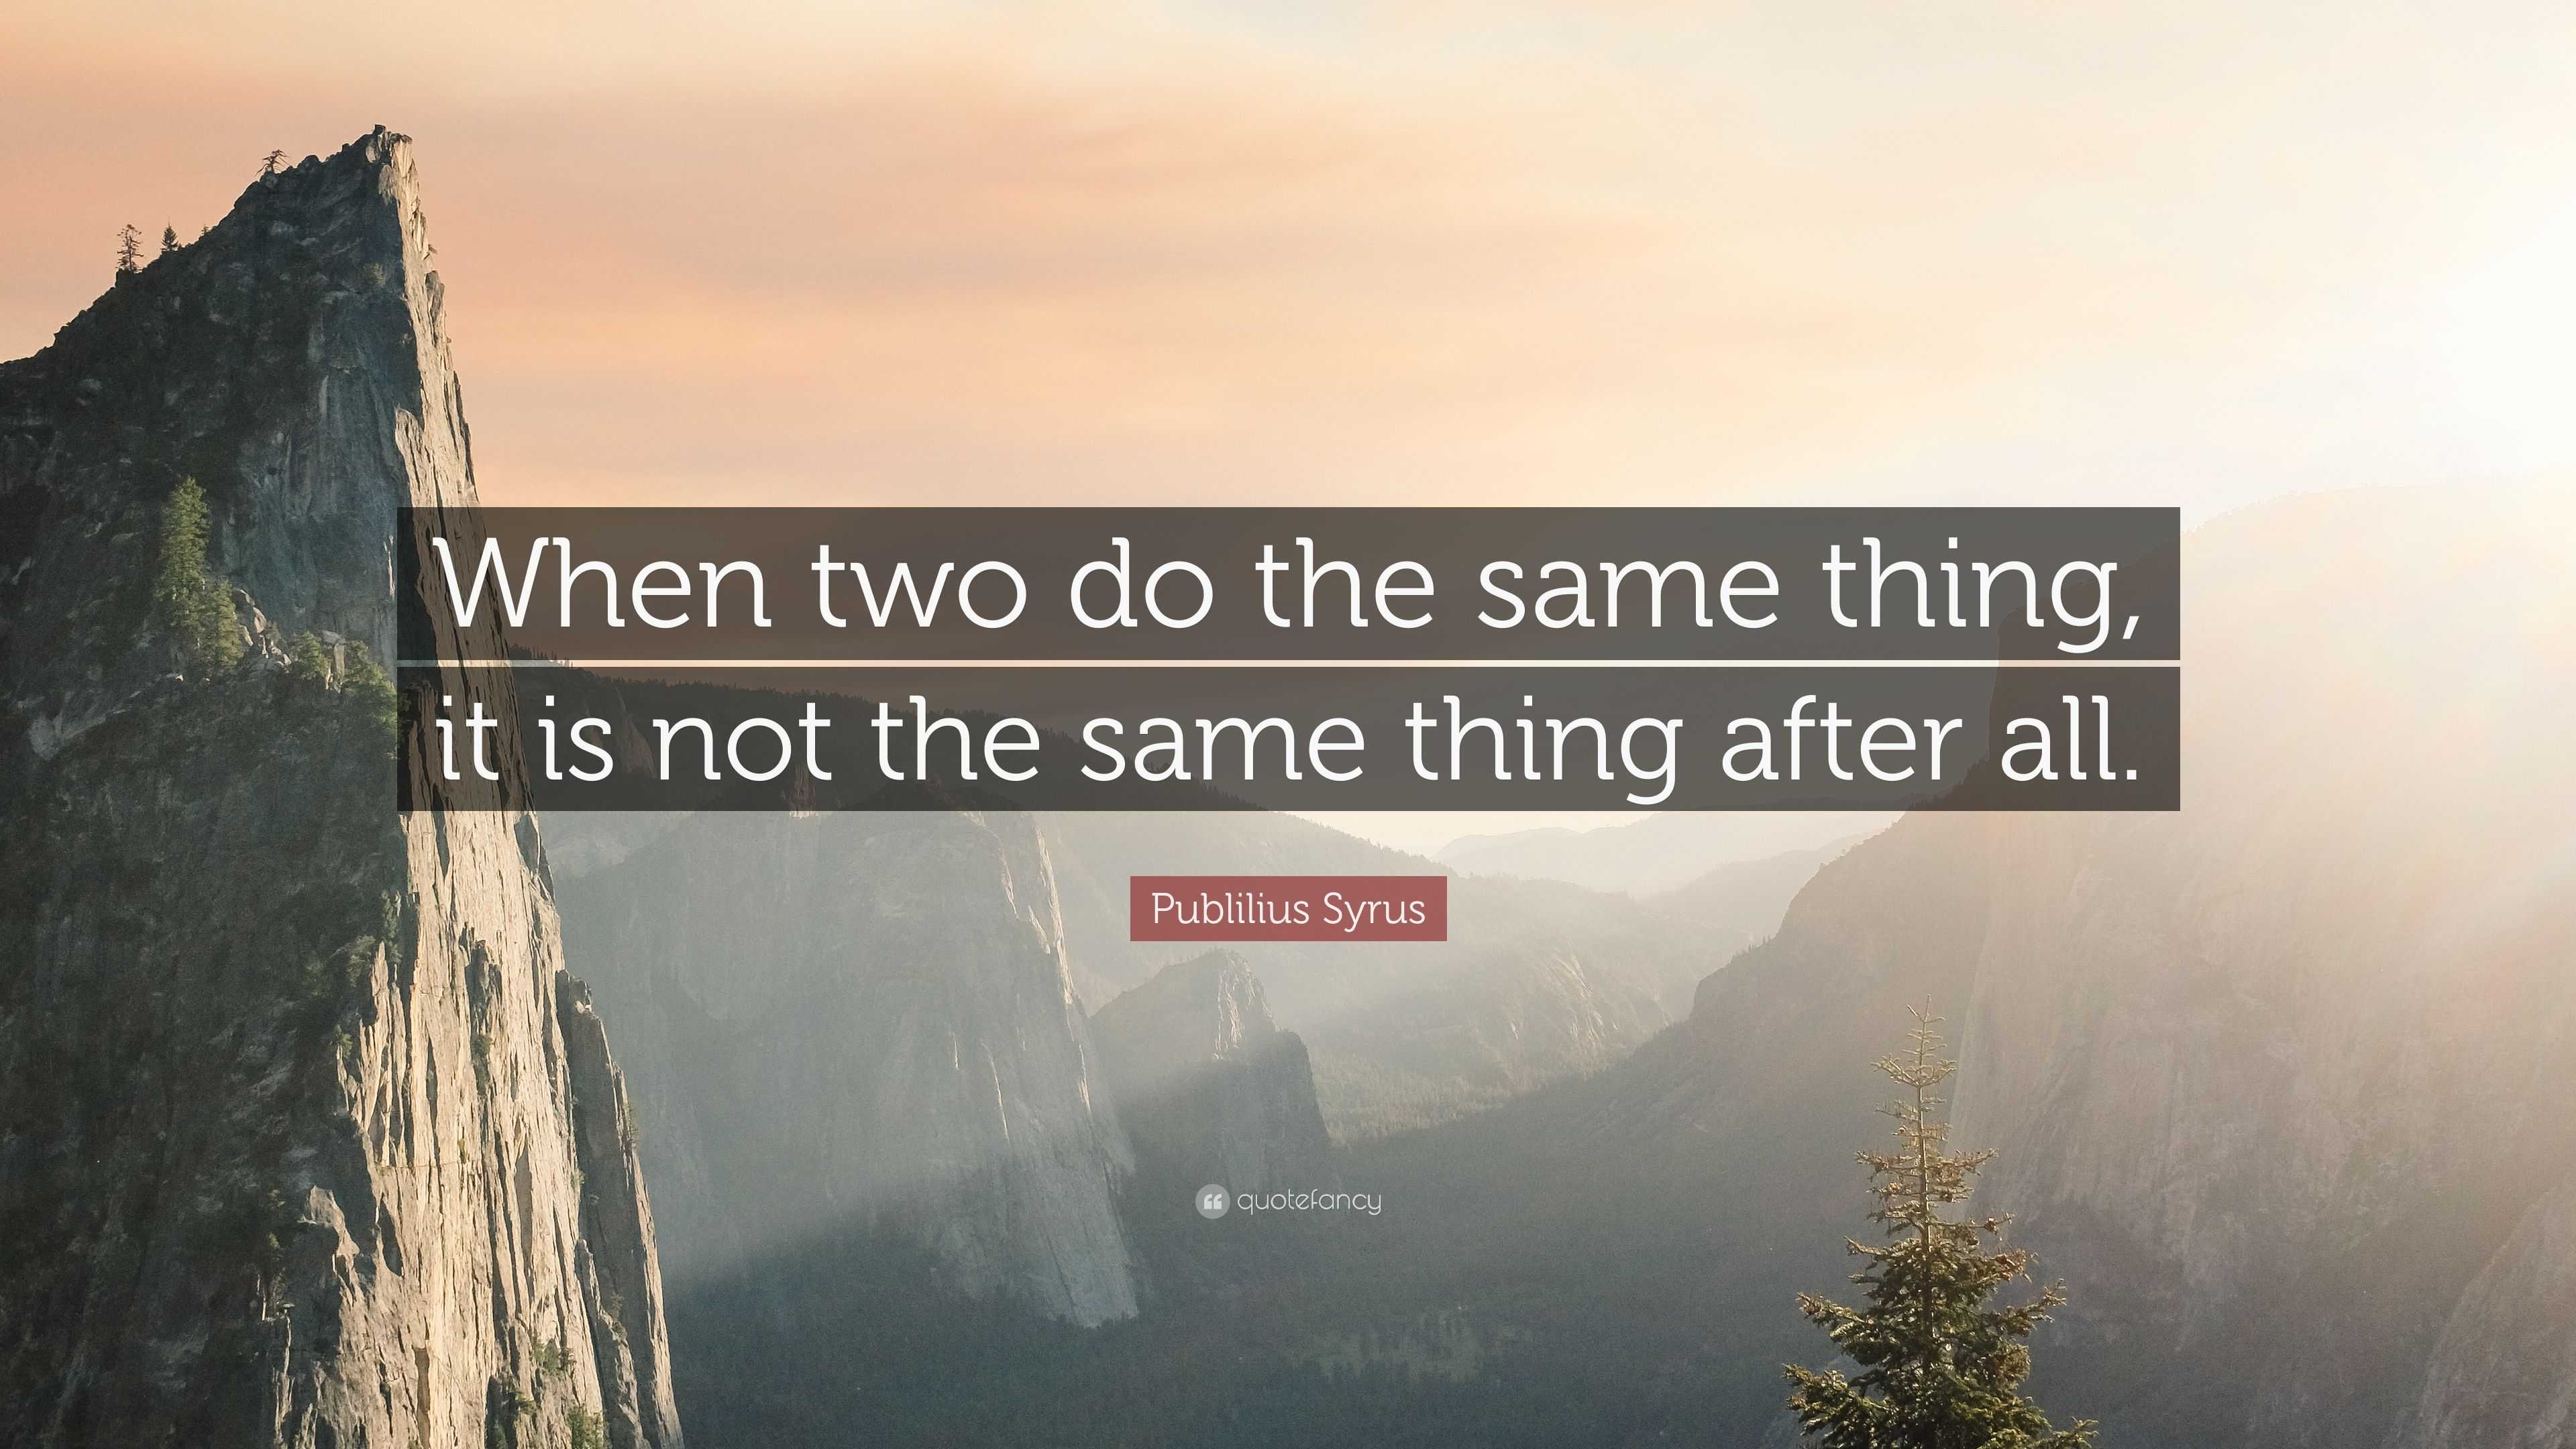 Publilius Syrus Quote: “When two do the same thing, it is not the same ...